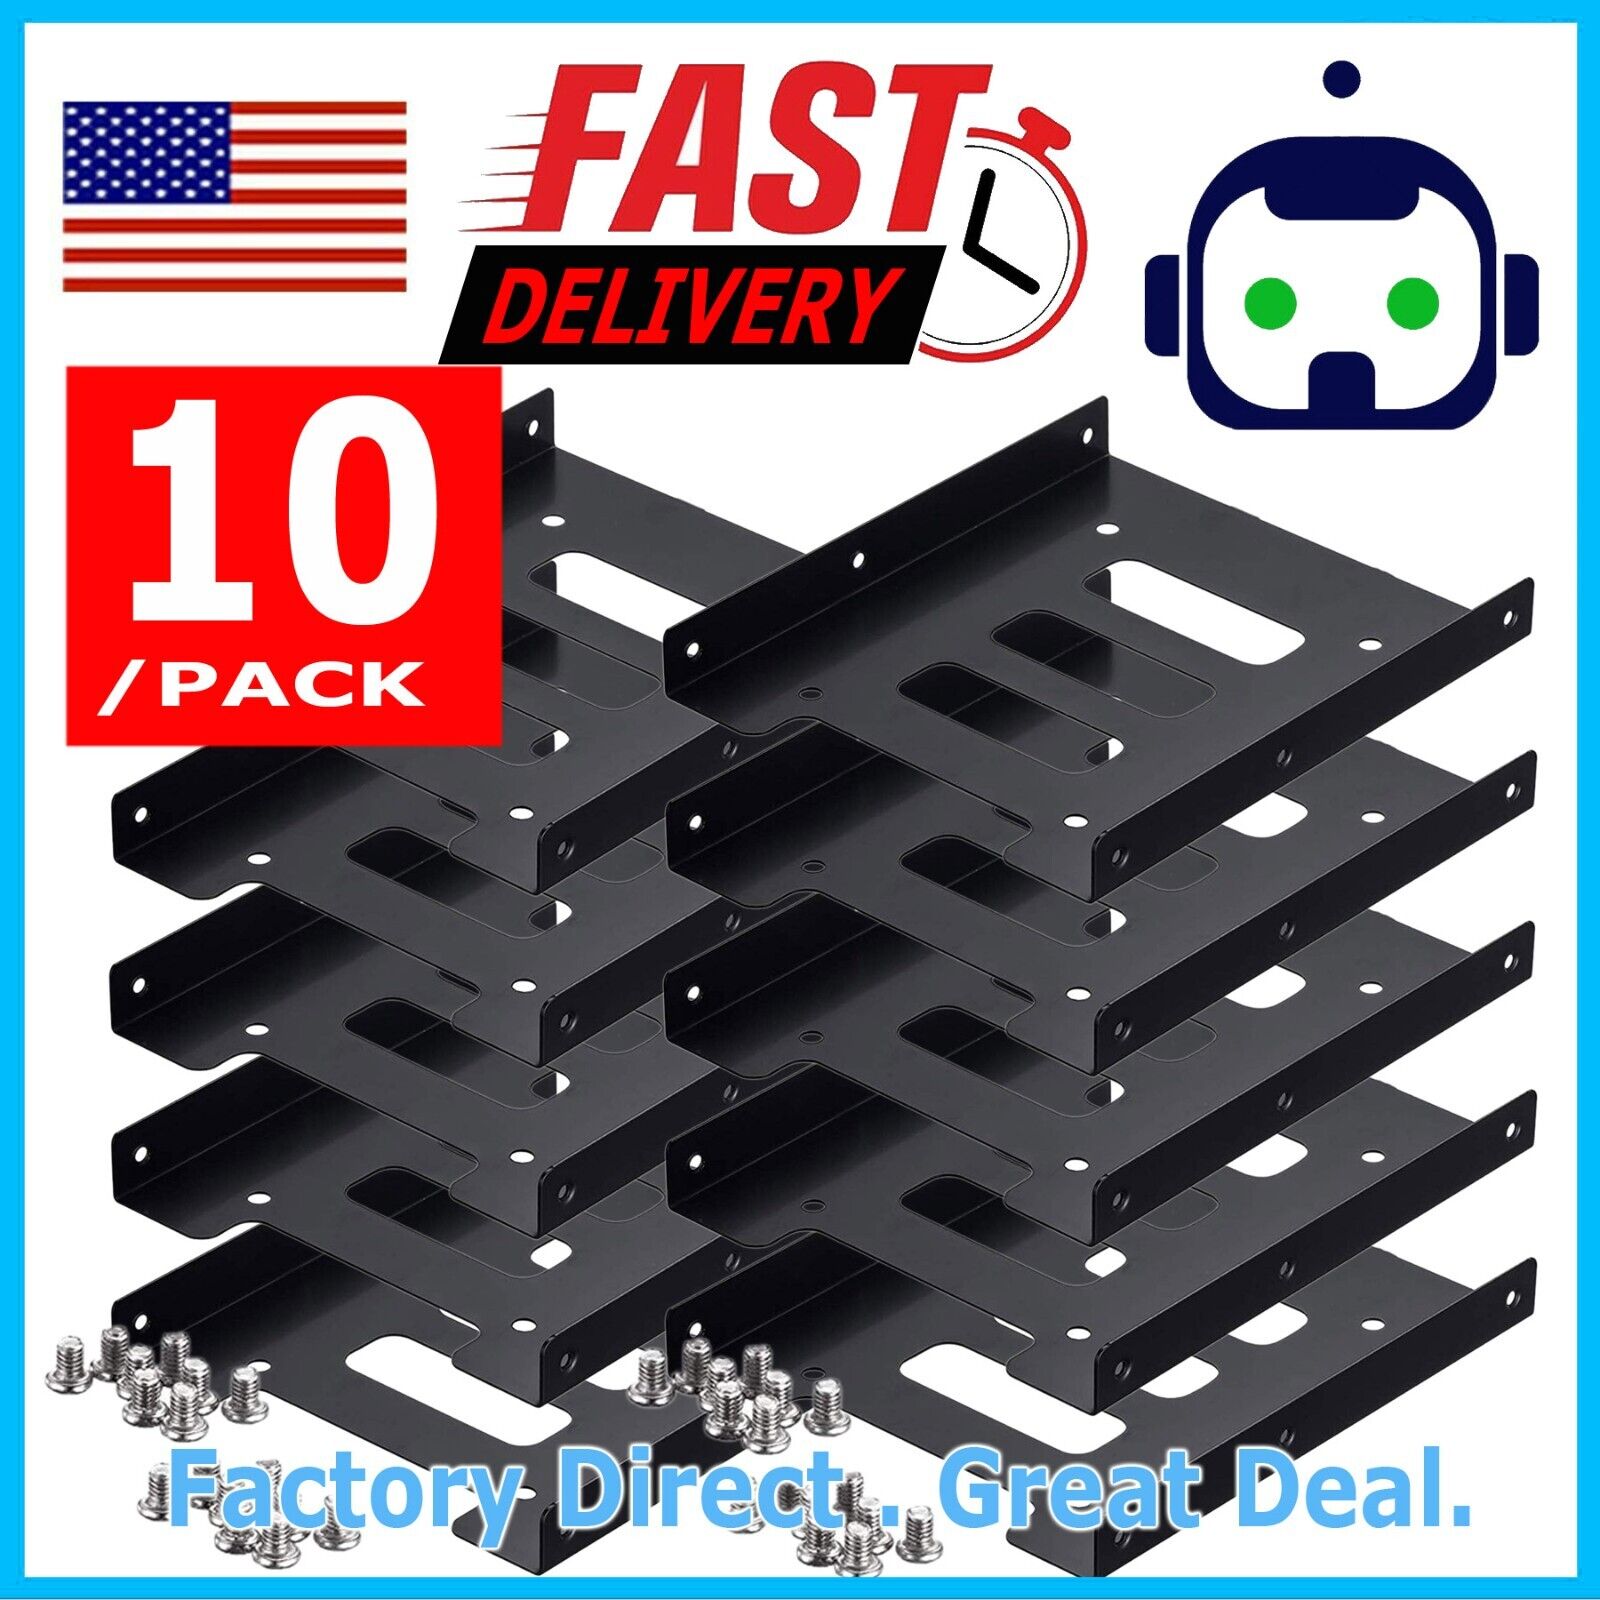 10 PC 2.5 to 3.5 Bay SSD Metal Hard Drive HDD Mounting Bracket Adapter Dock Tray